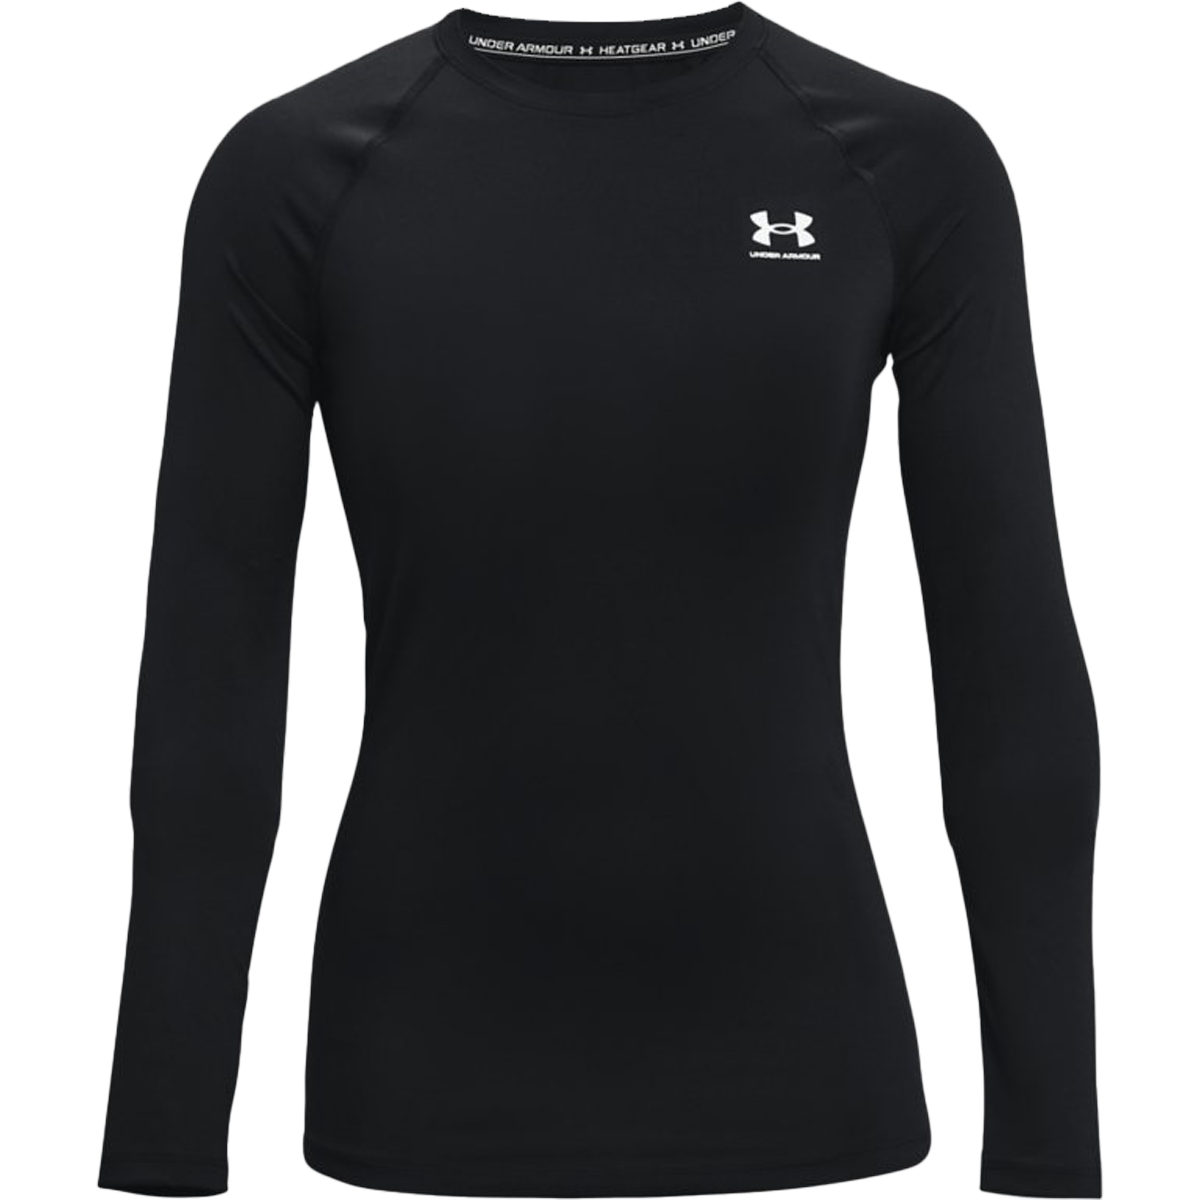 Under Armour HeatGear Armour Men's Compression Long Sleeve Shirt | Source  for Sports